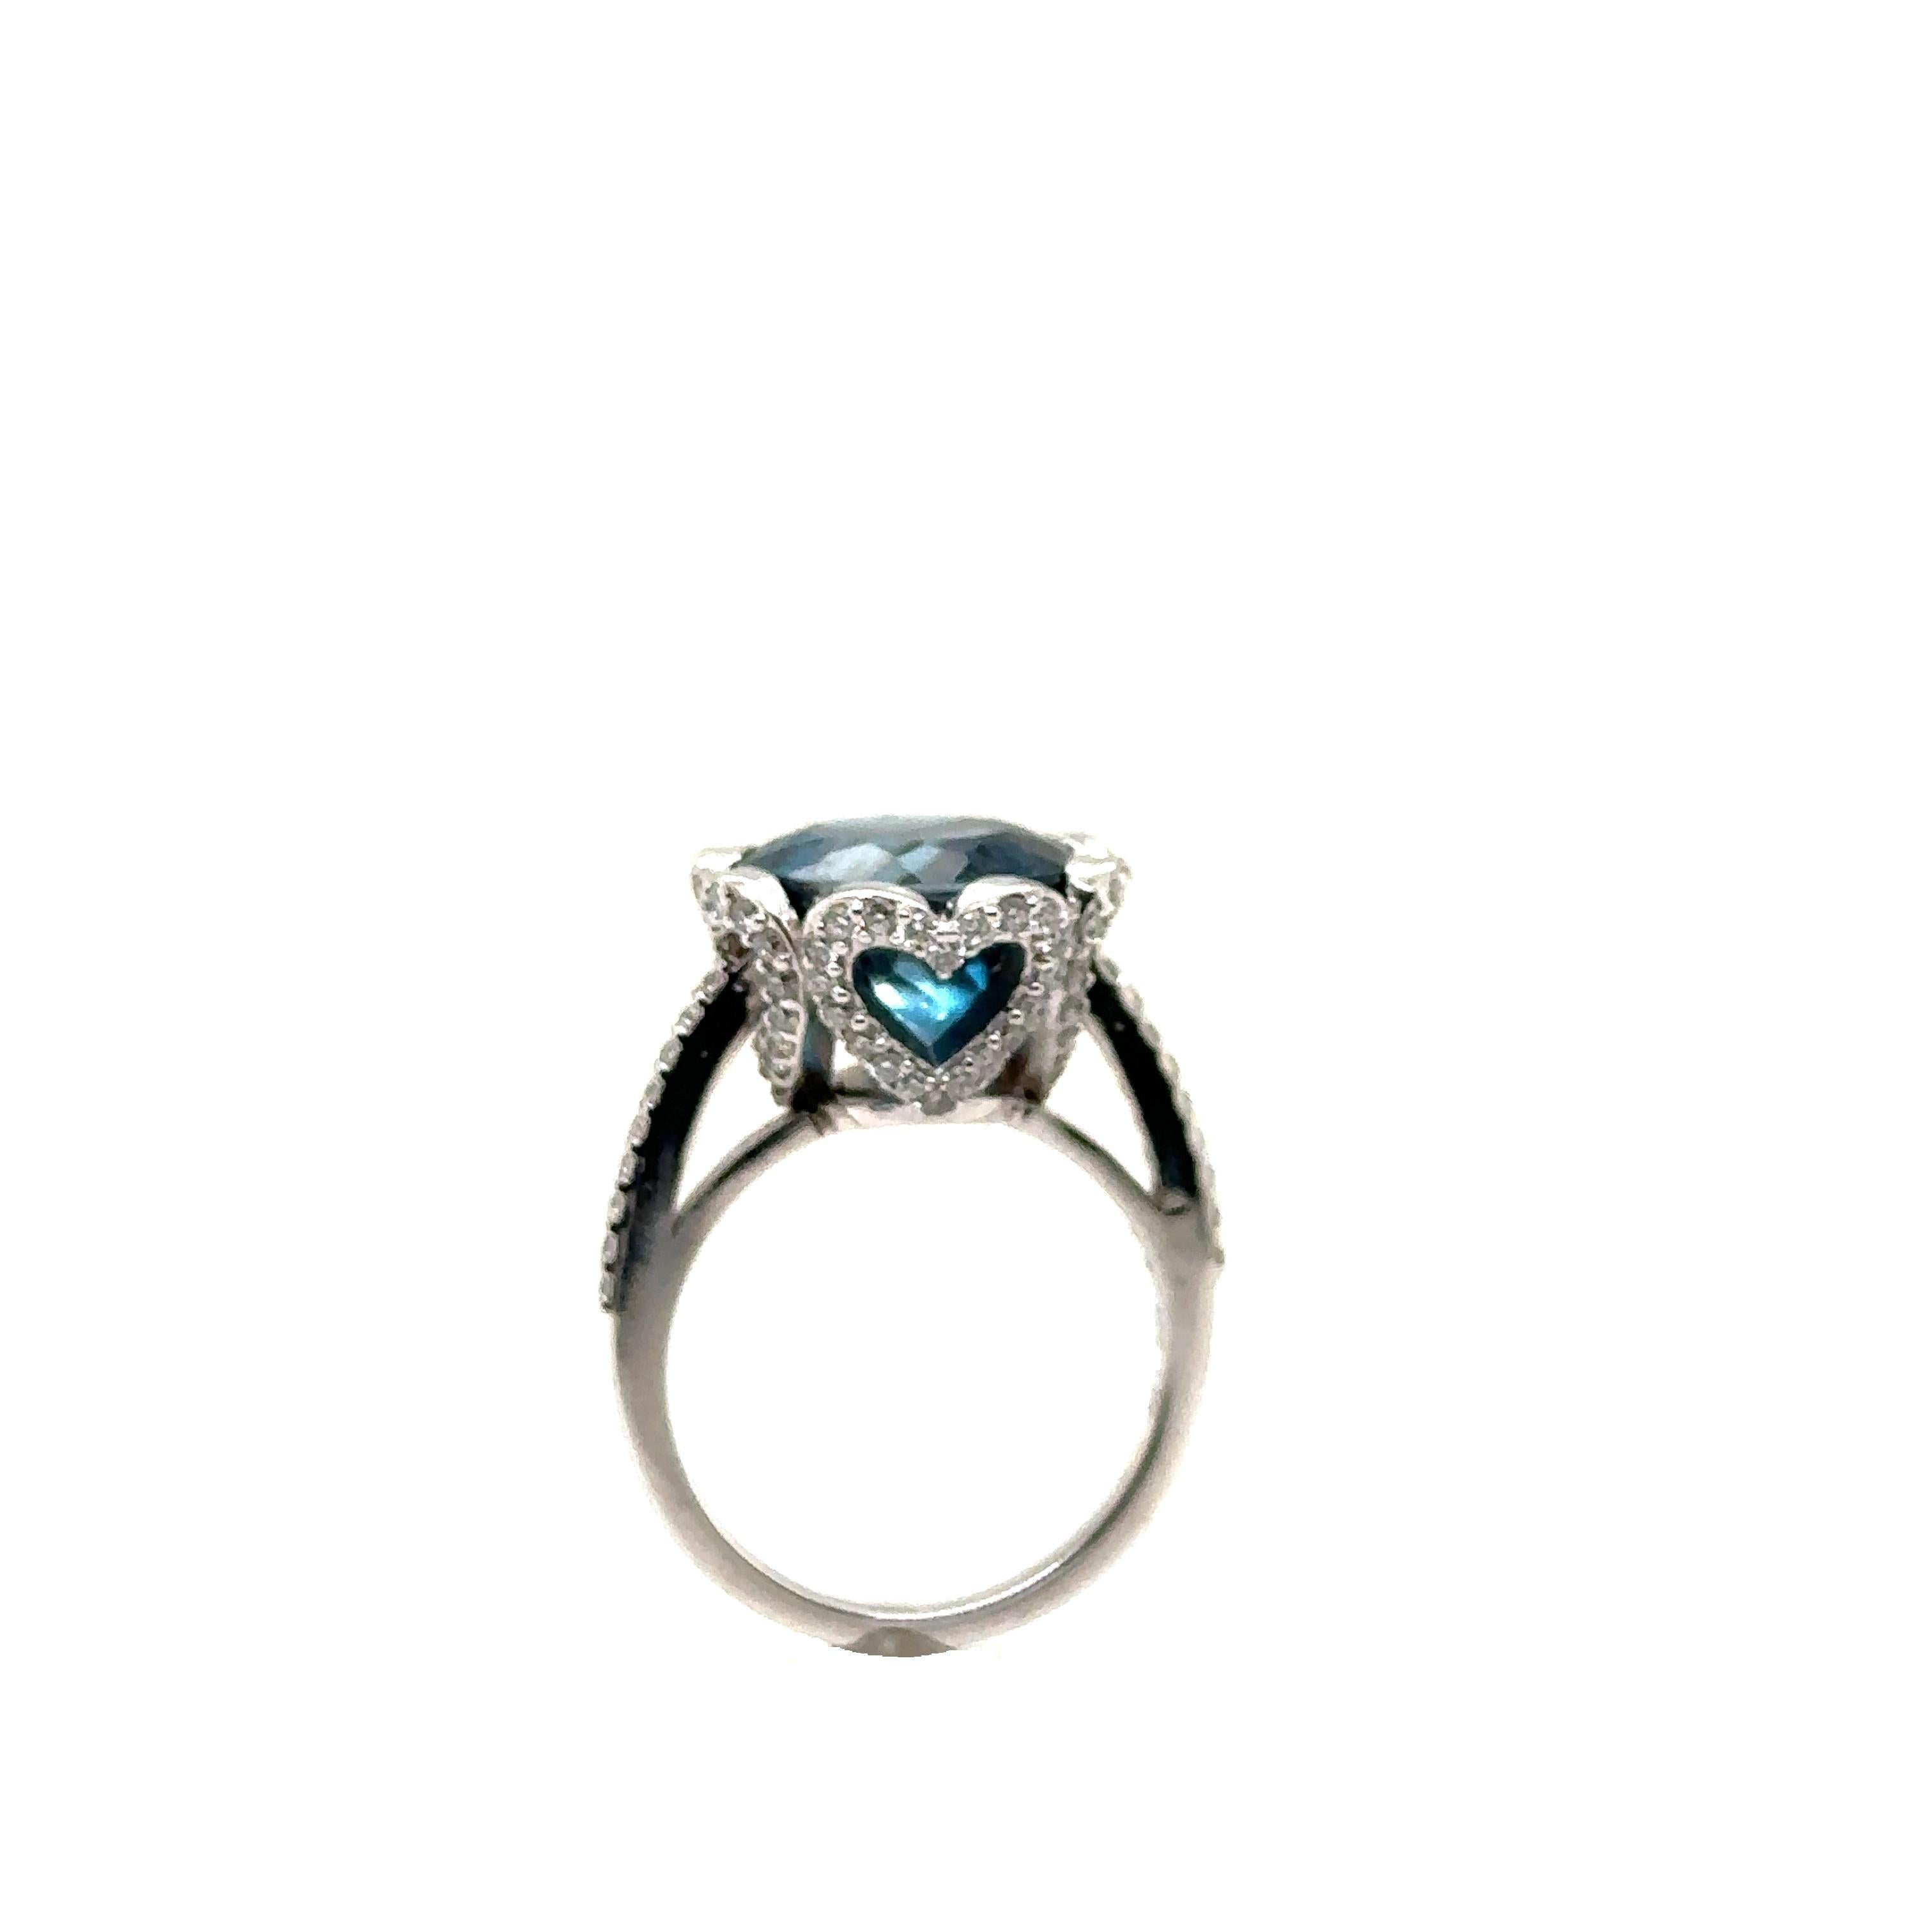 JAS-21-2230LBT - 14K WG 1 Ct GH-SI1 DIAMONDS & 12MM 8.50Ct RD LONDON BLUE TOPAZ In New Condition For Sale In New York, NY